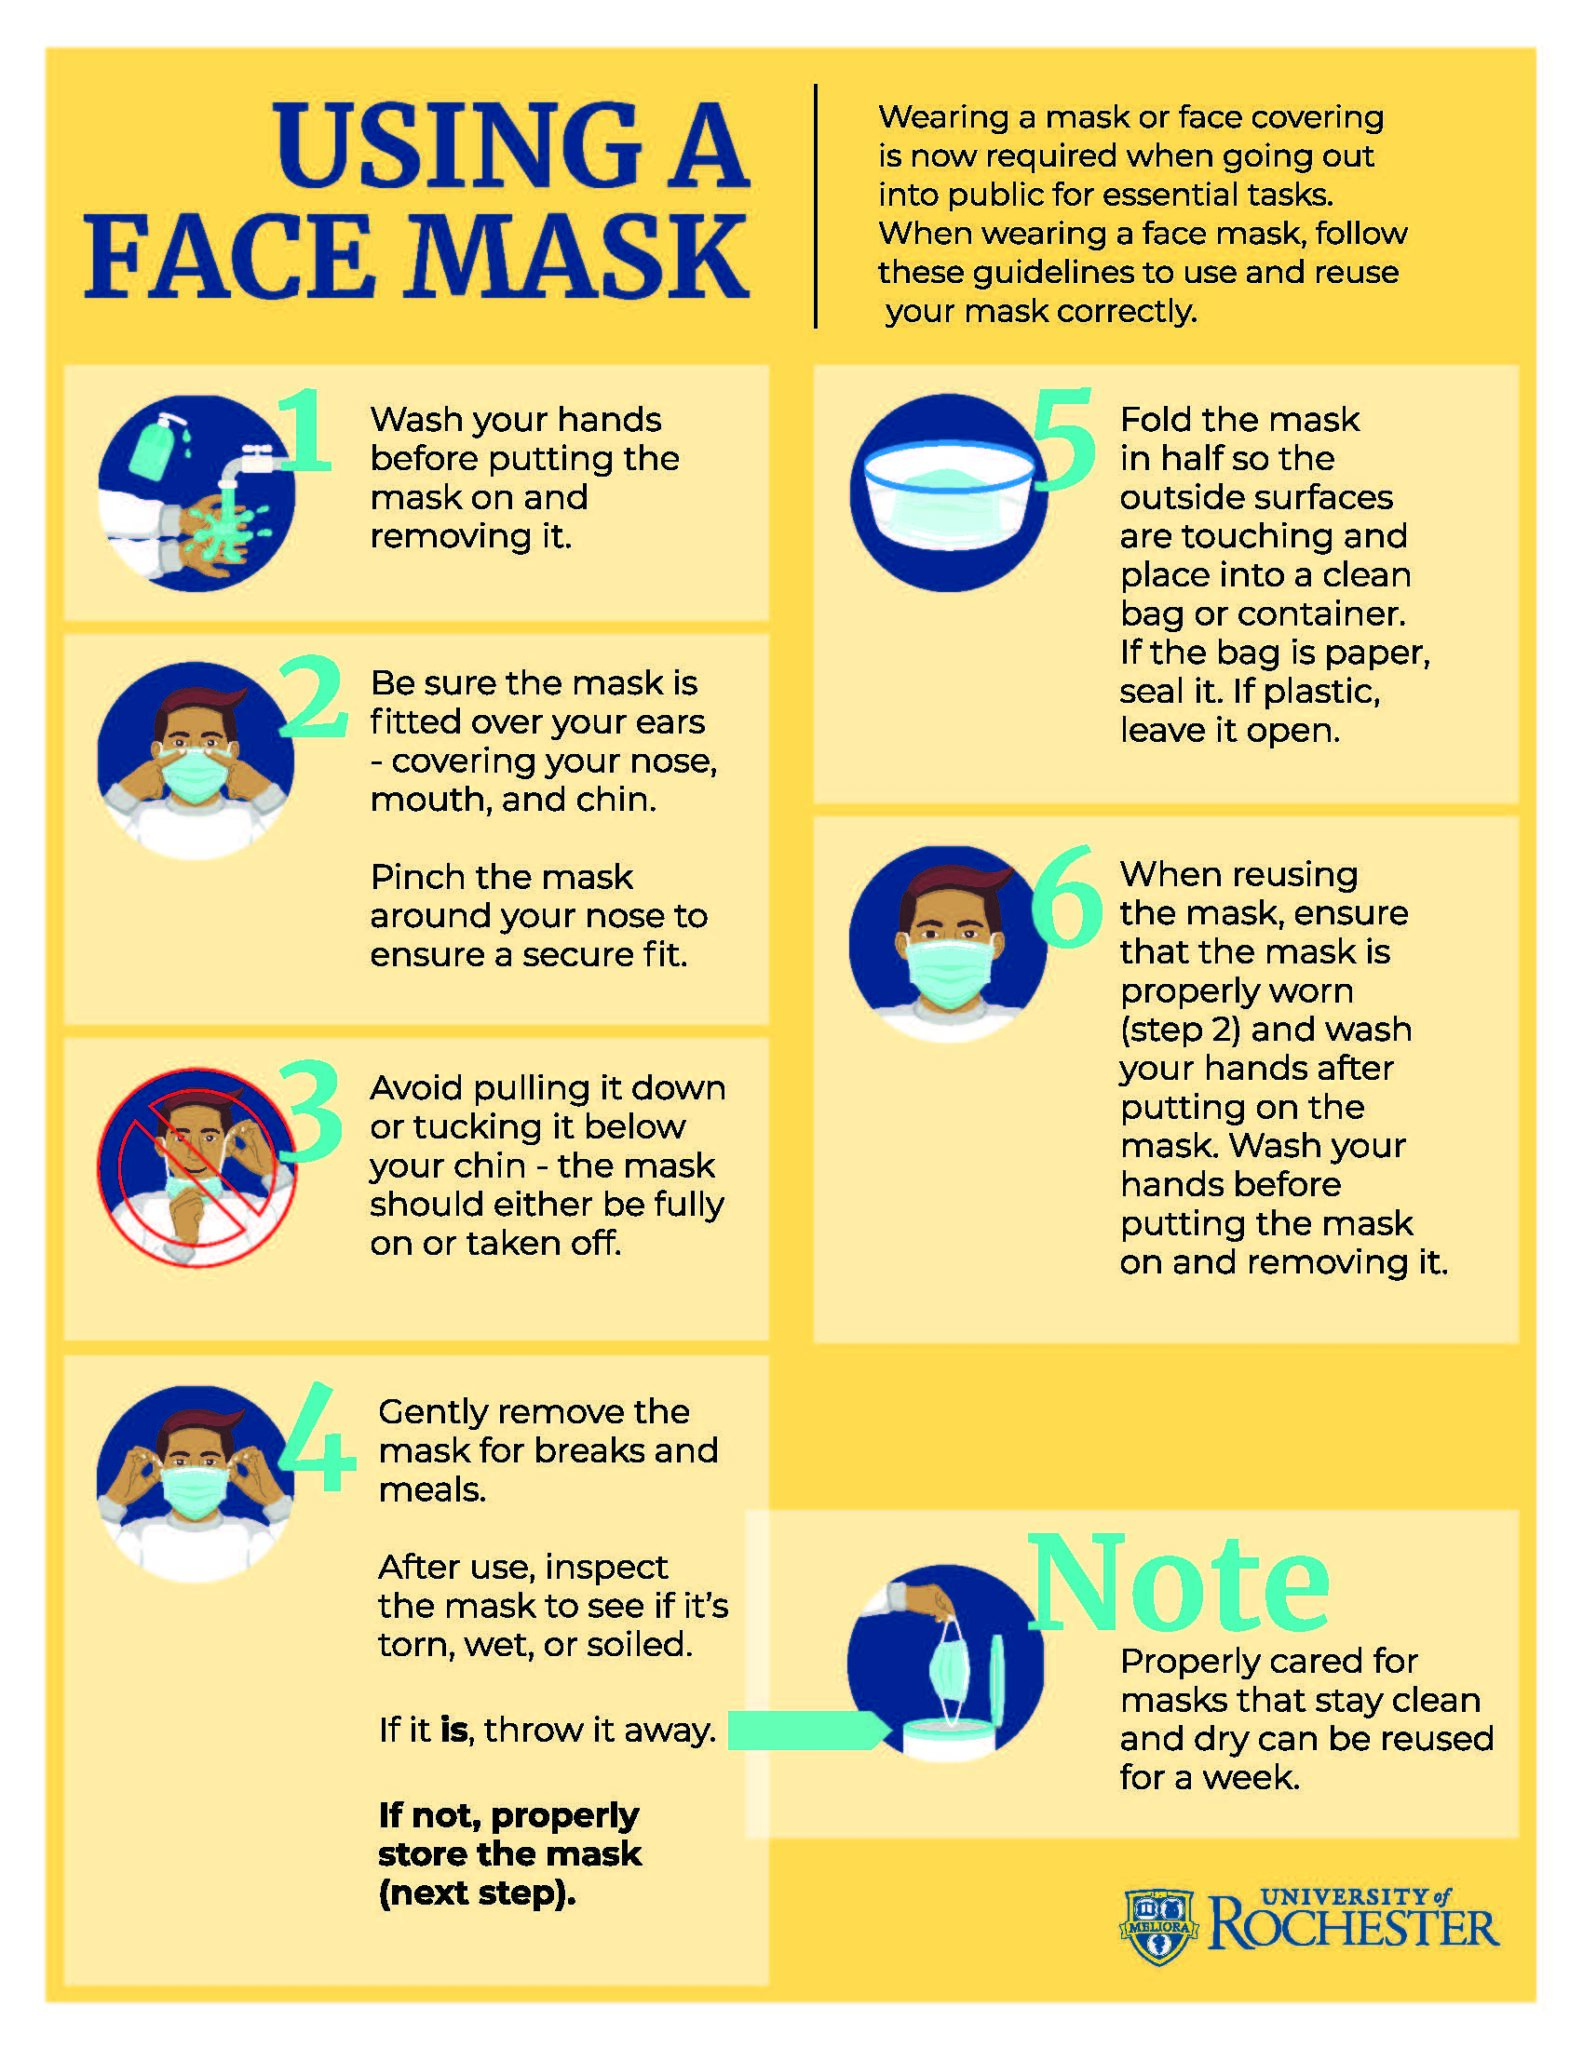 New face mask policies, resources announced for employees and students ...